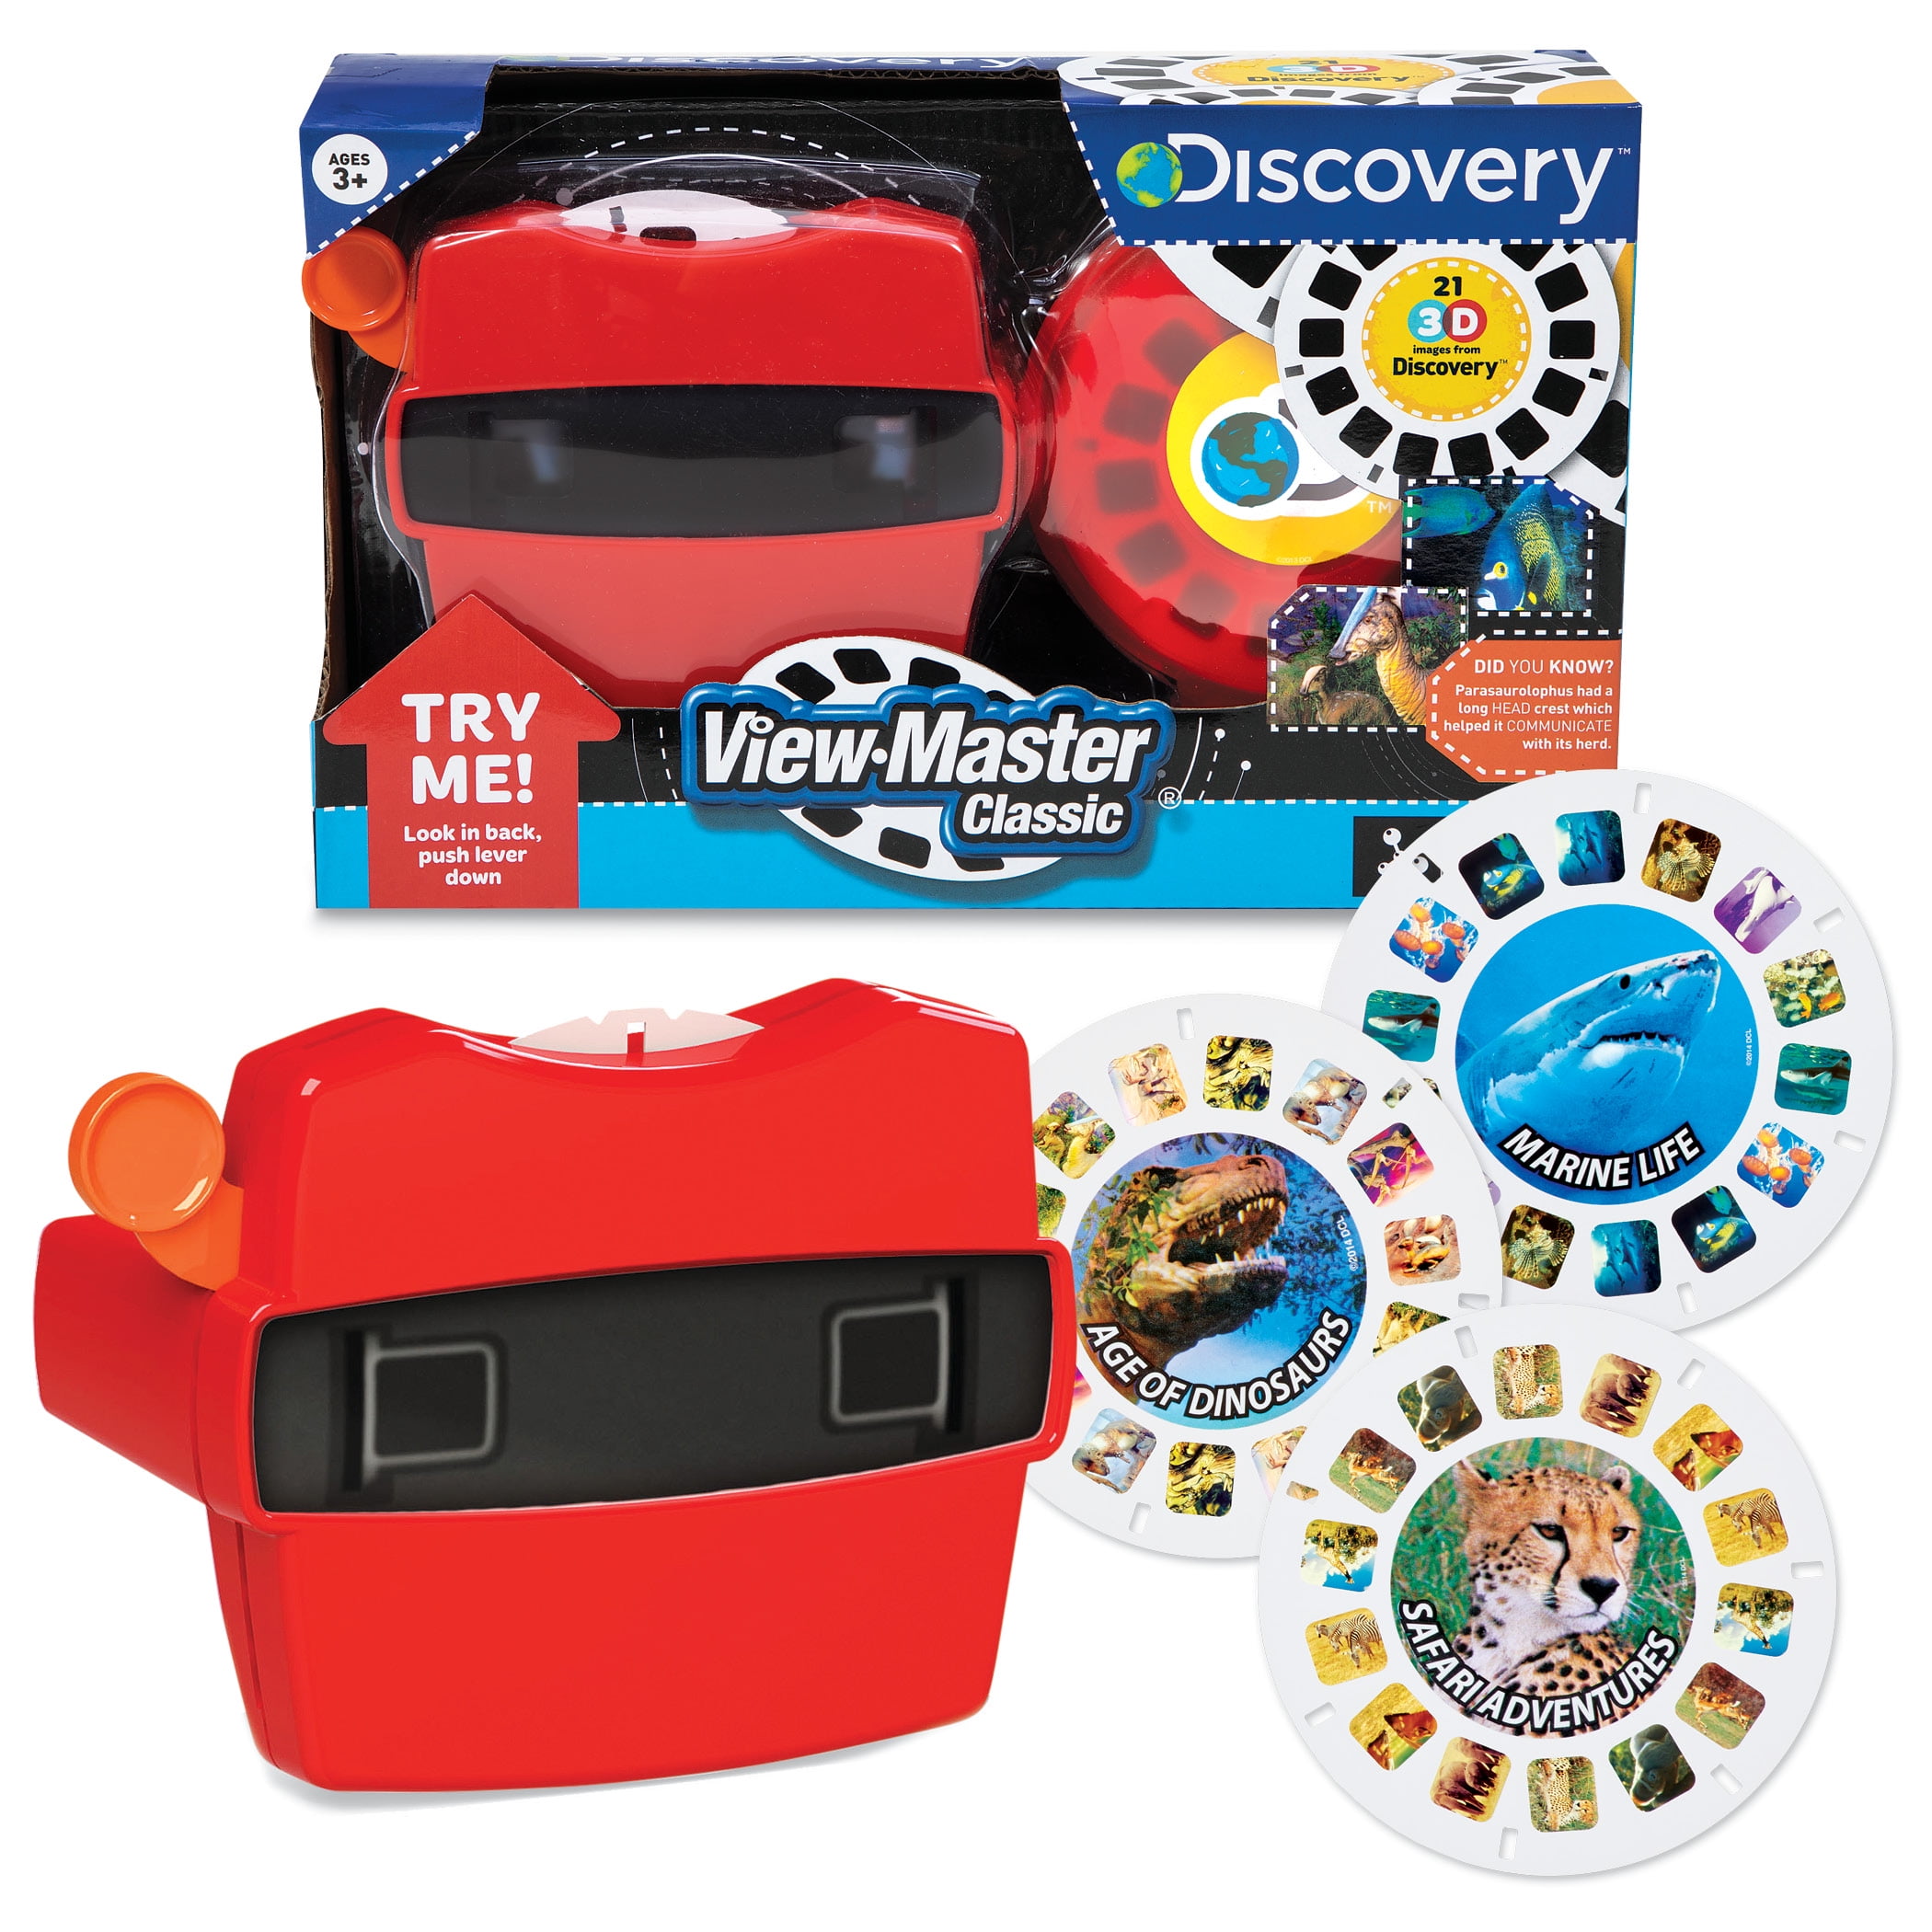 View-Master 187254 Discovery Boxed Set - Walmart.com